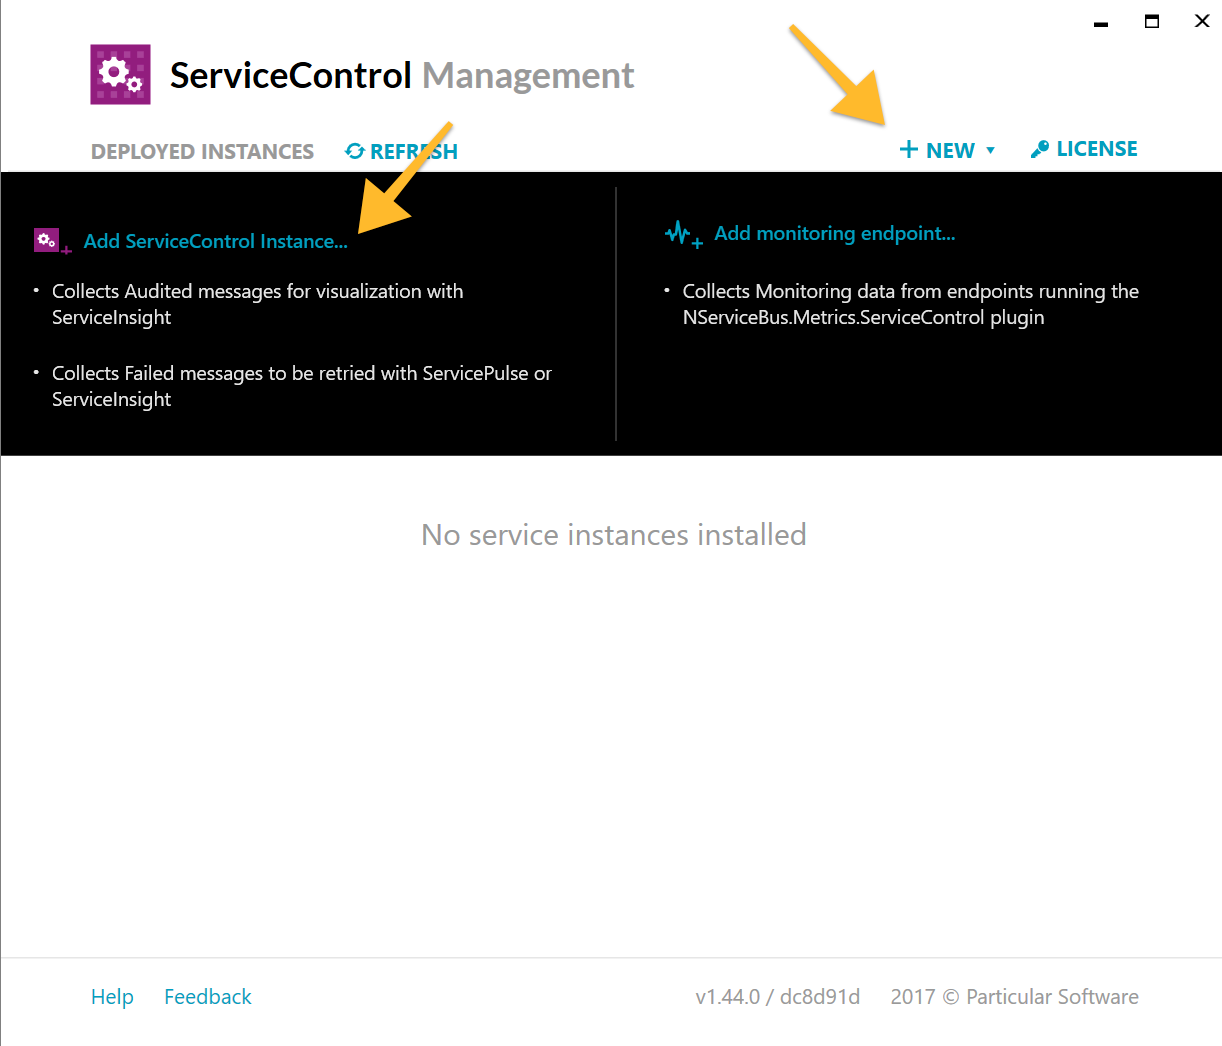 ServiceControl Management Utility - Add new ServiceControl instance